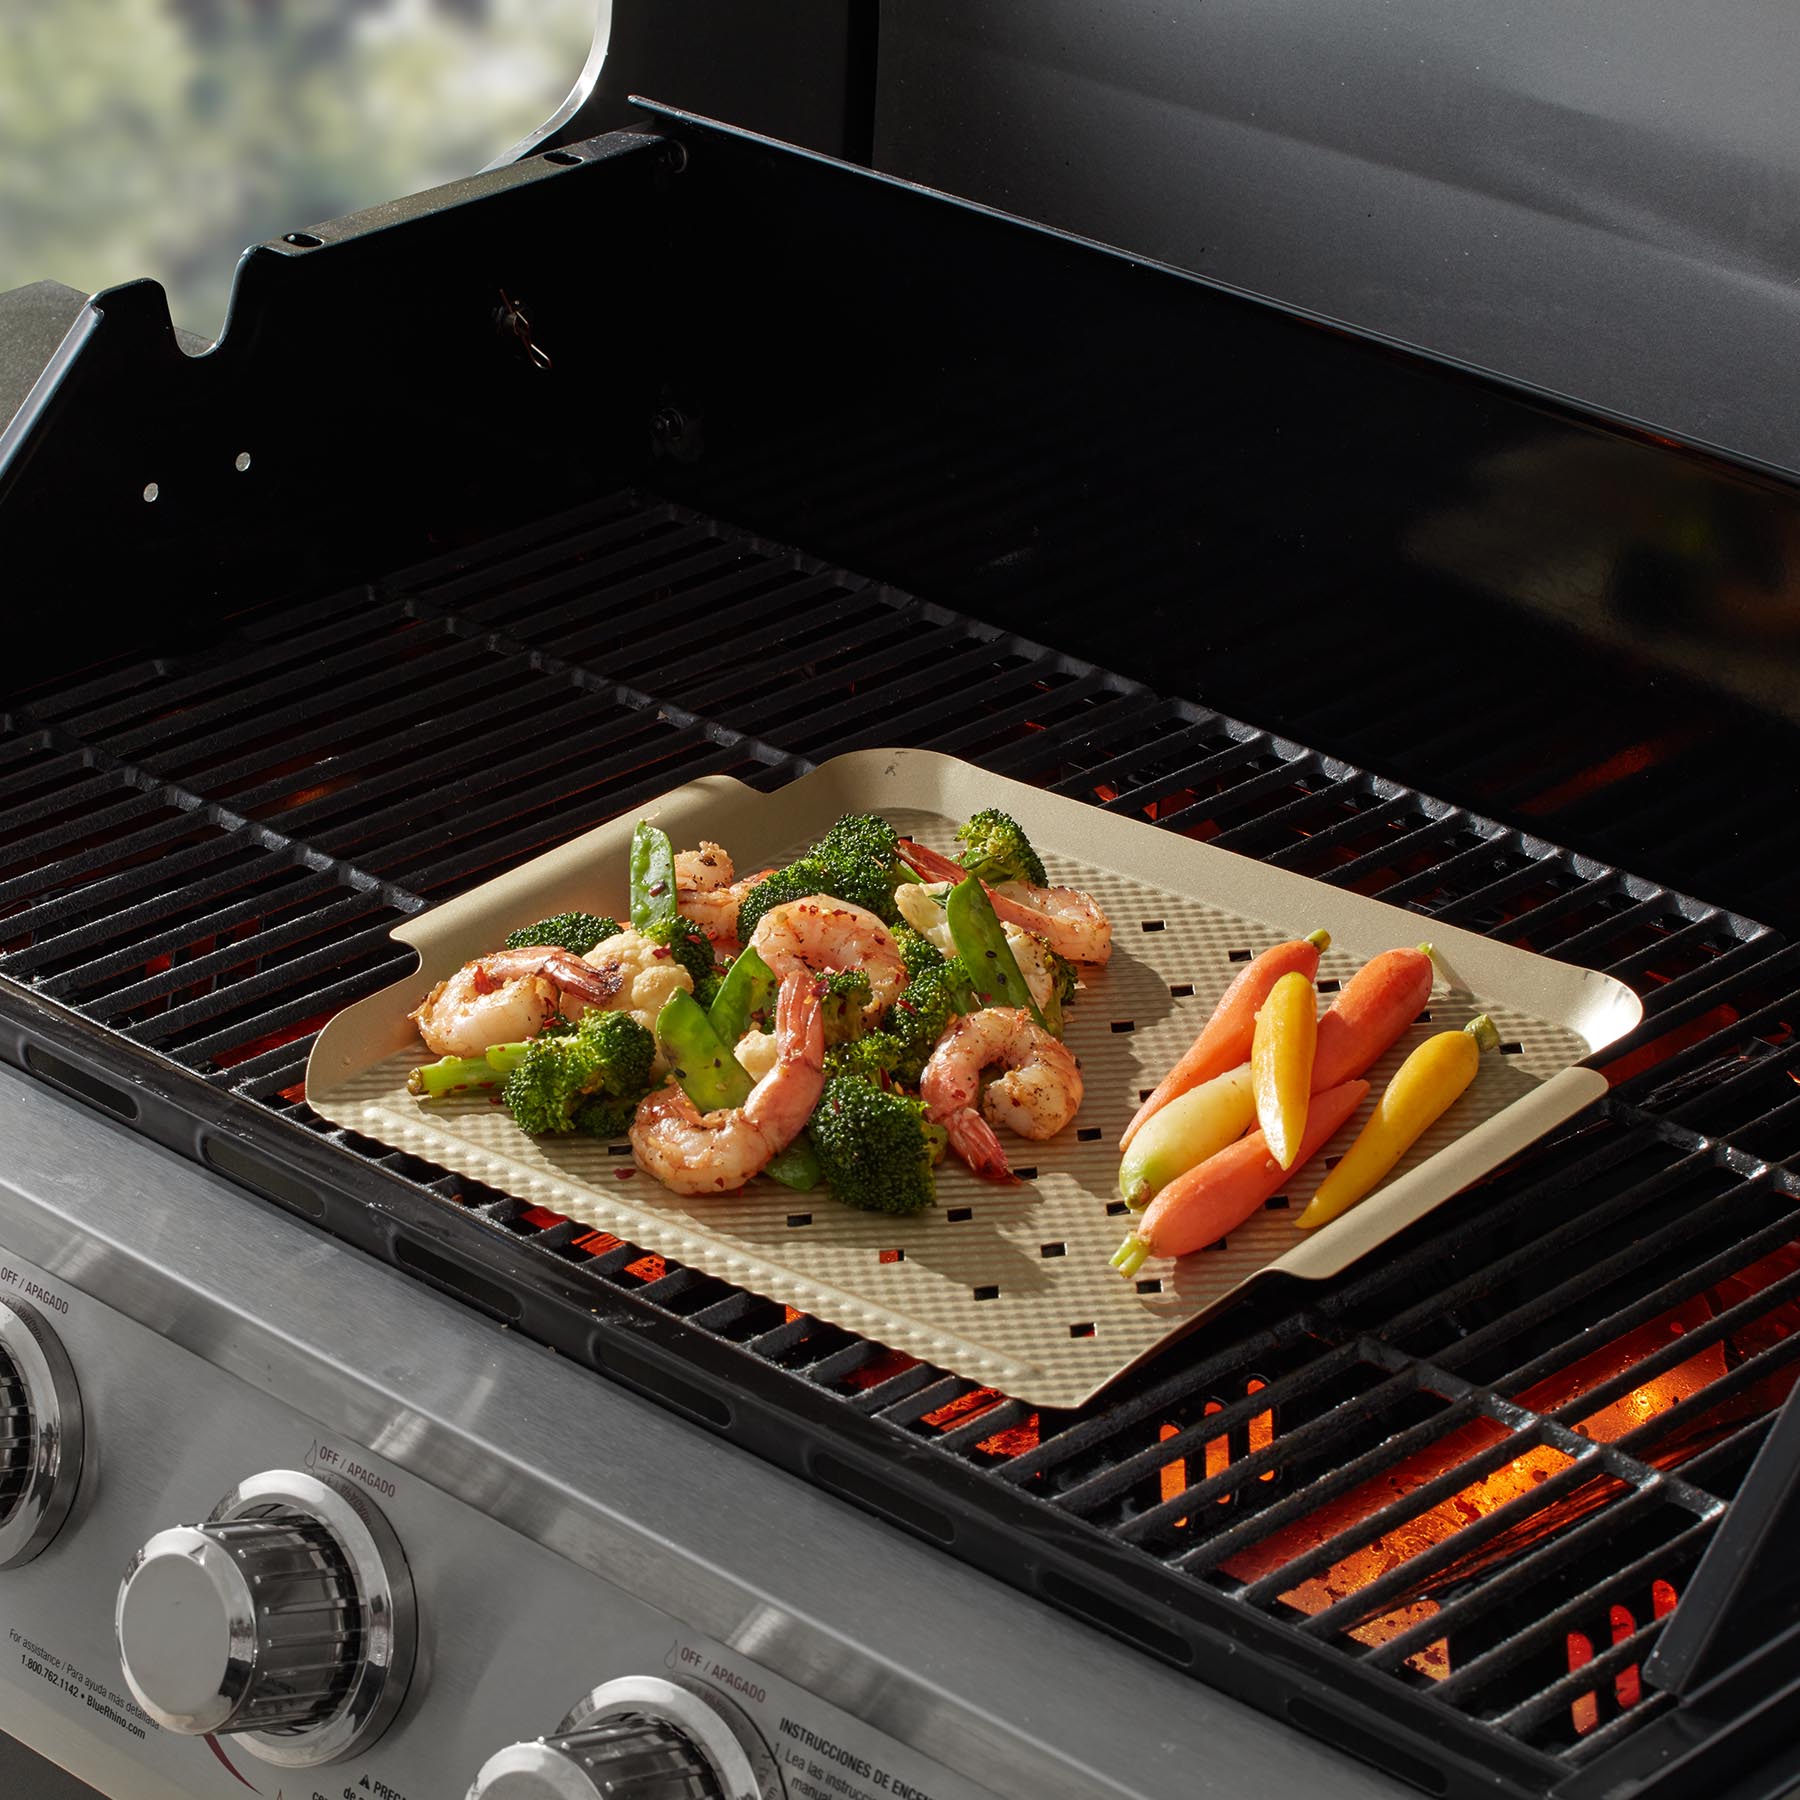 Glass Ceramic Stove Flat Top Grill, Restaurant quality, with all the  comforts of home. Our Flat Top Grill is compatible with electric, gas, and  glass ceramic stoves., By Steelmade